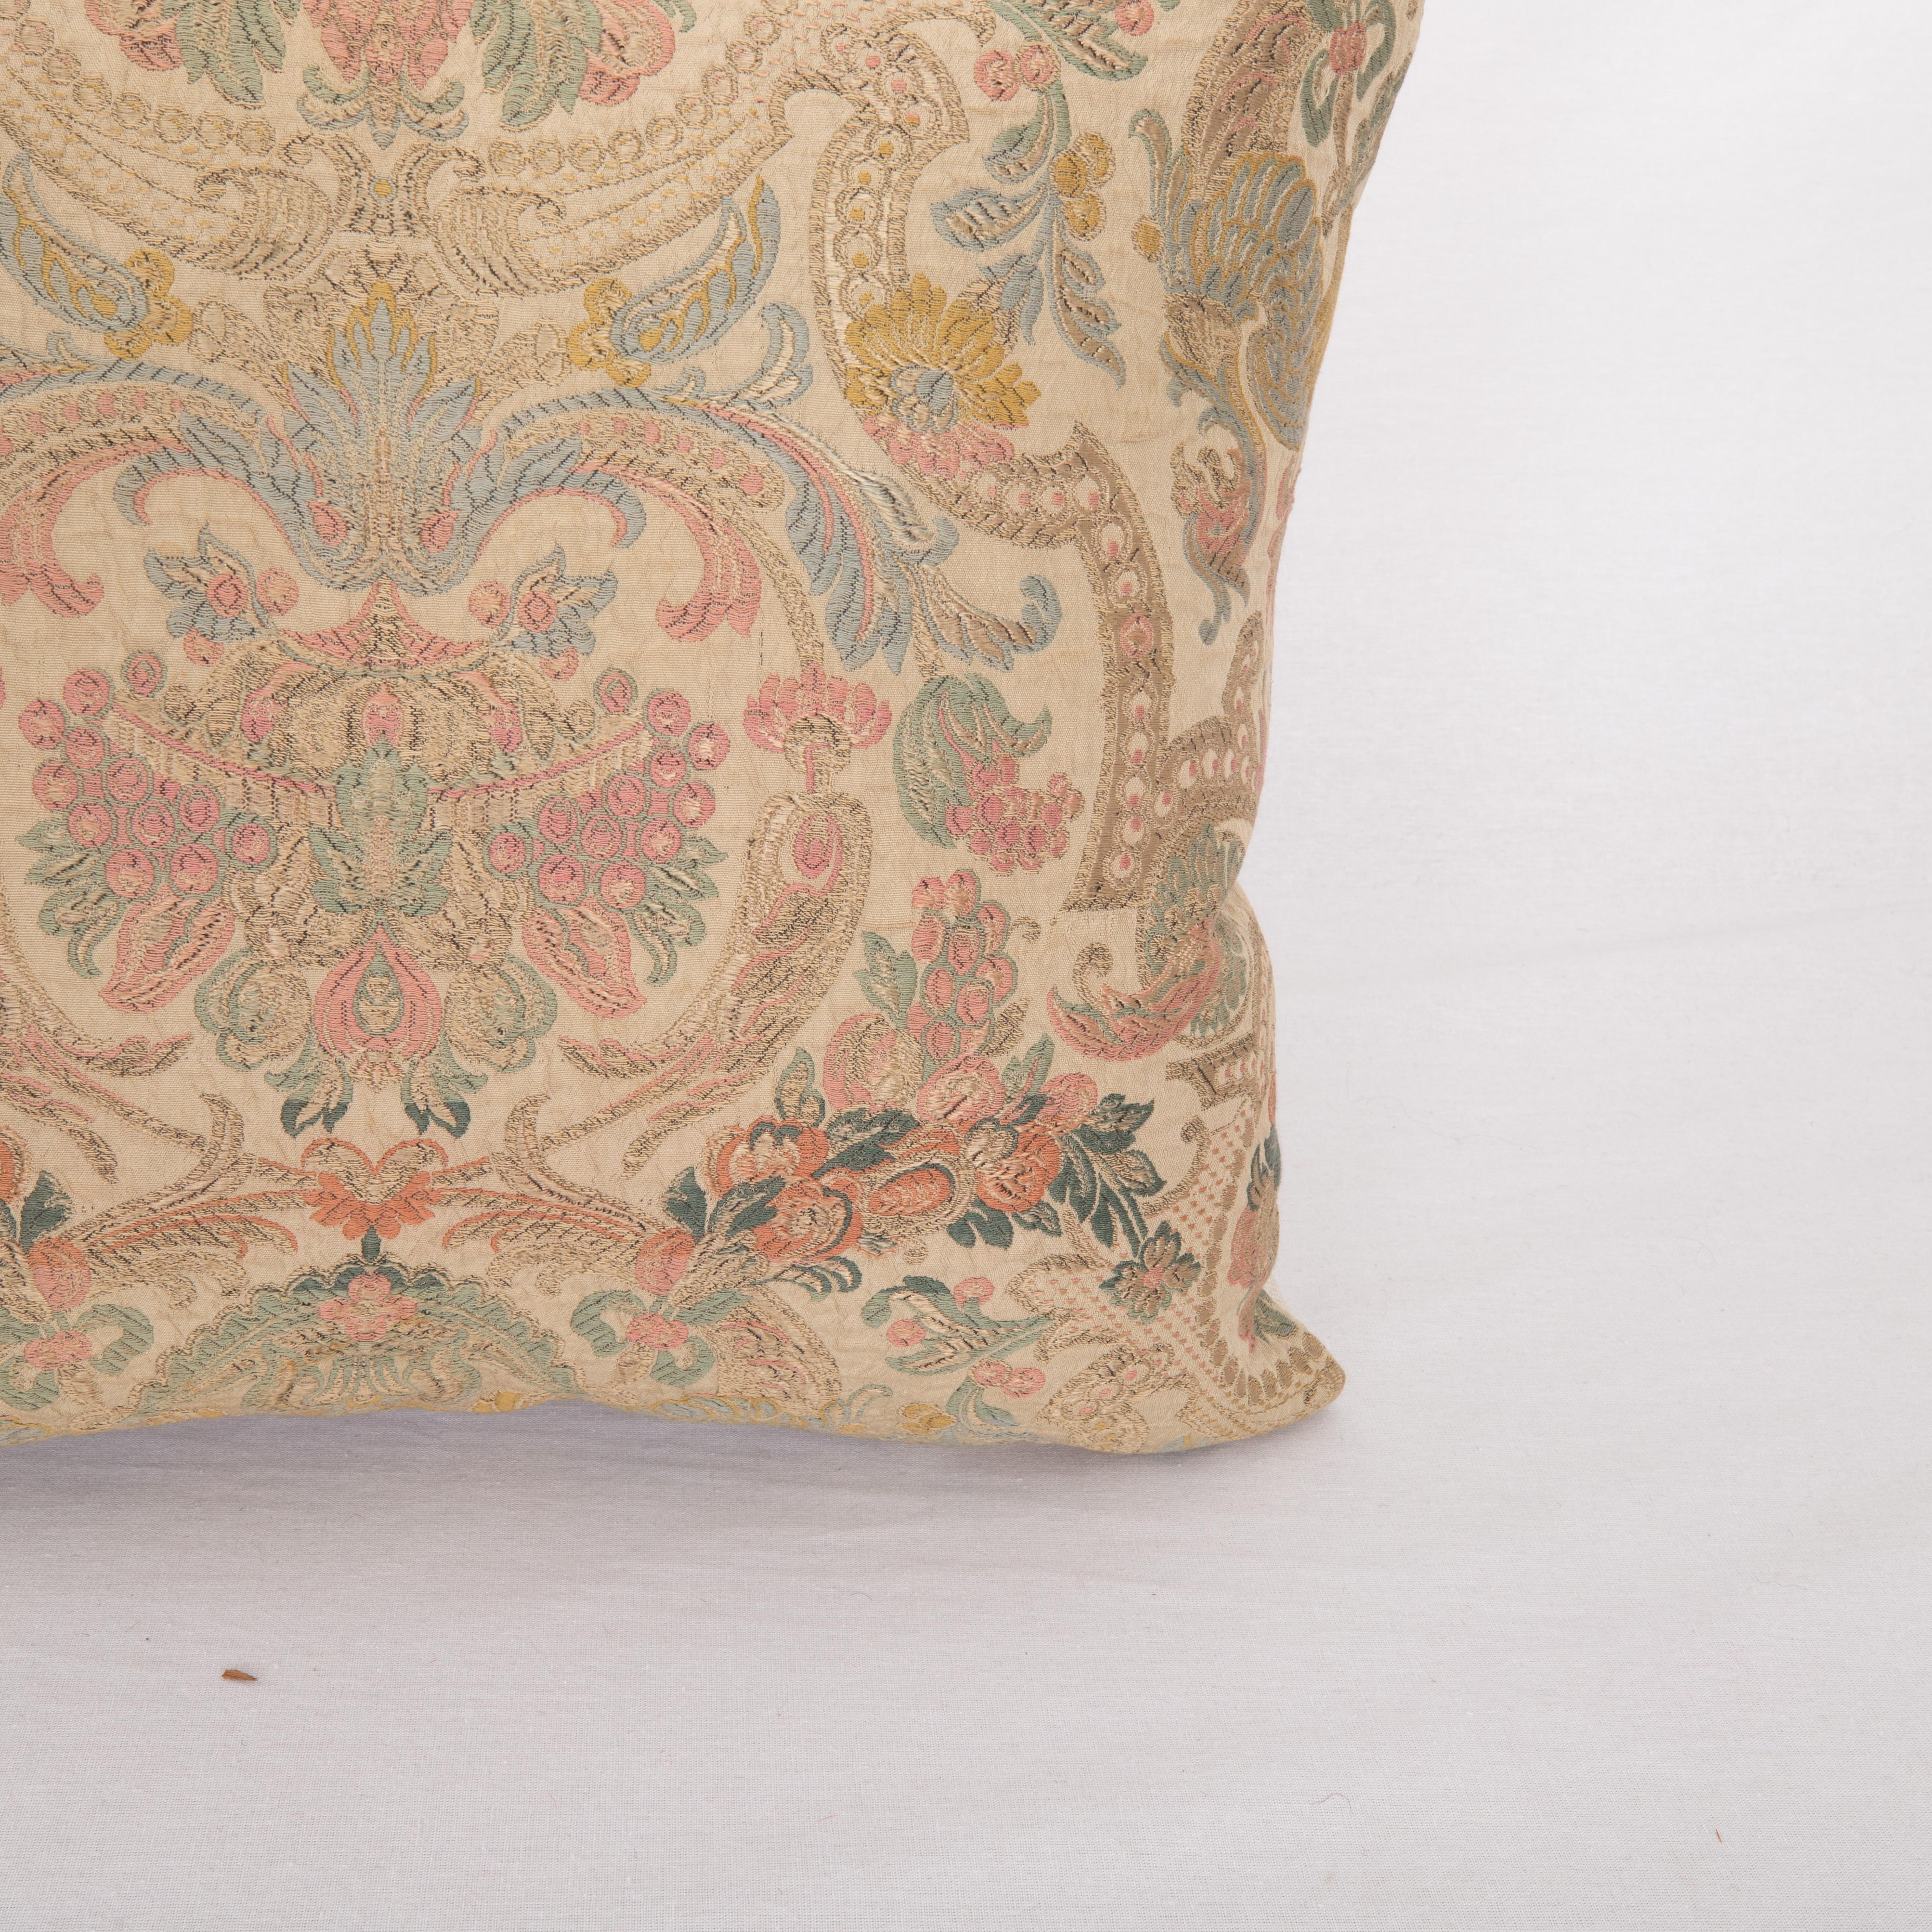 Italian Pillow Cover Made from an Early 20th C. European Textile For Sale